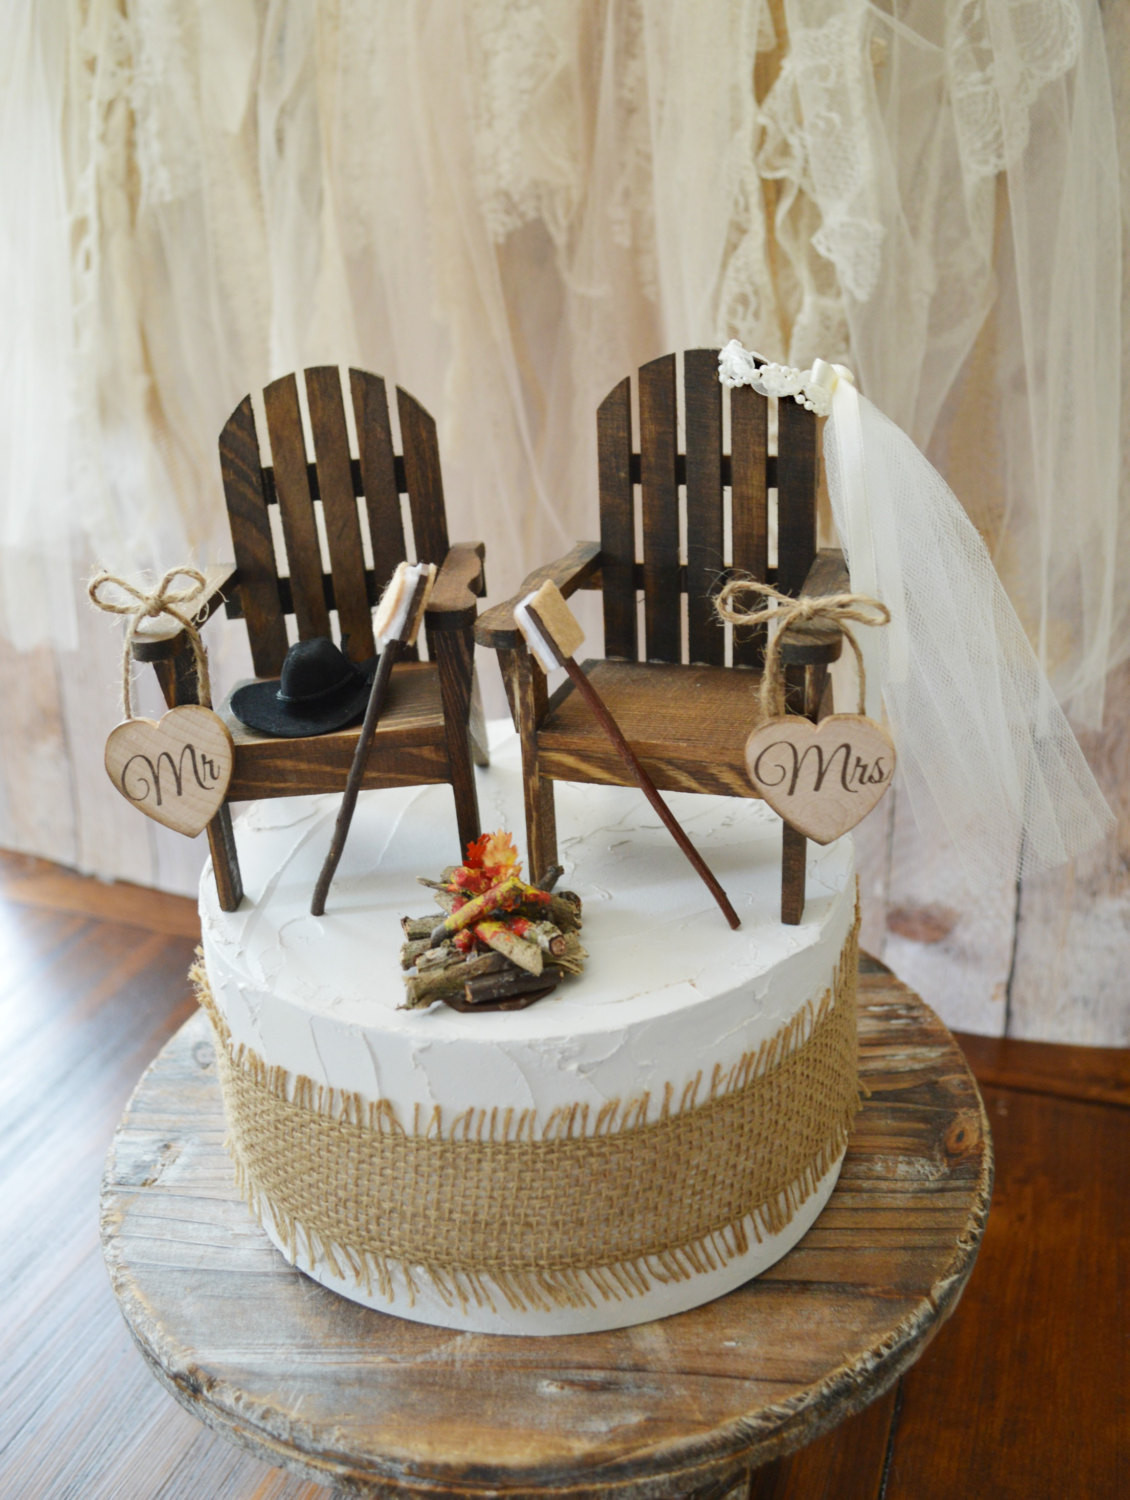 Country Wedding Cake Toppers
 camping wedding cake topper country rustic weddings wood